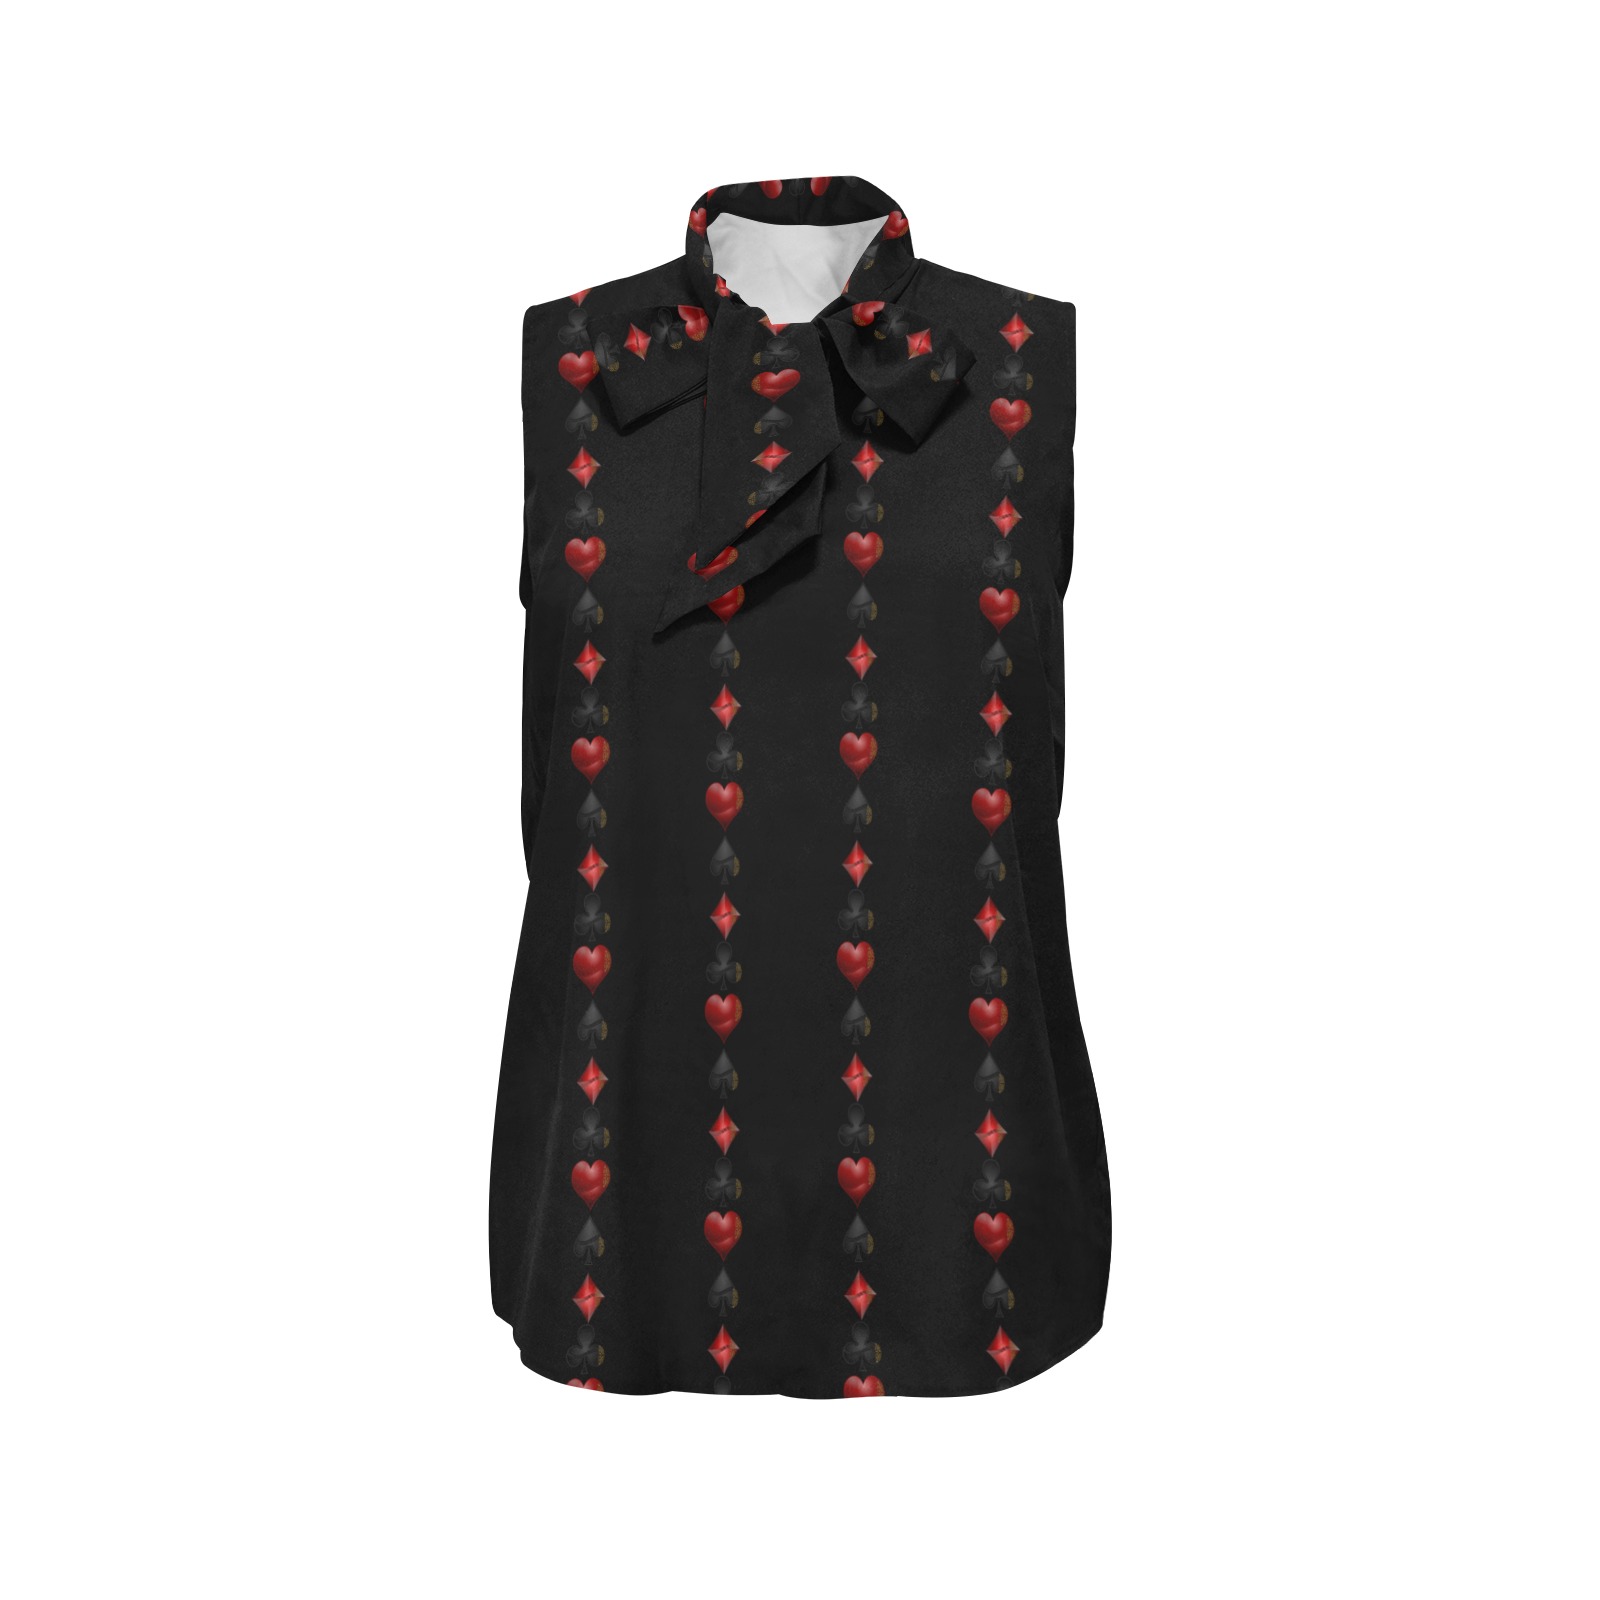 Black Red Playing Card Shapes - Black Women's Bow Tie V-Neck Sleeveless Shirt (Model T69)